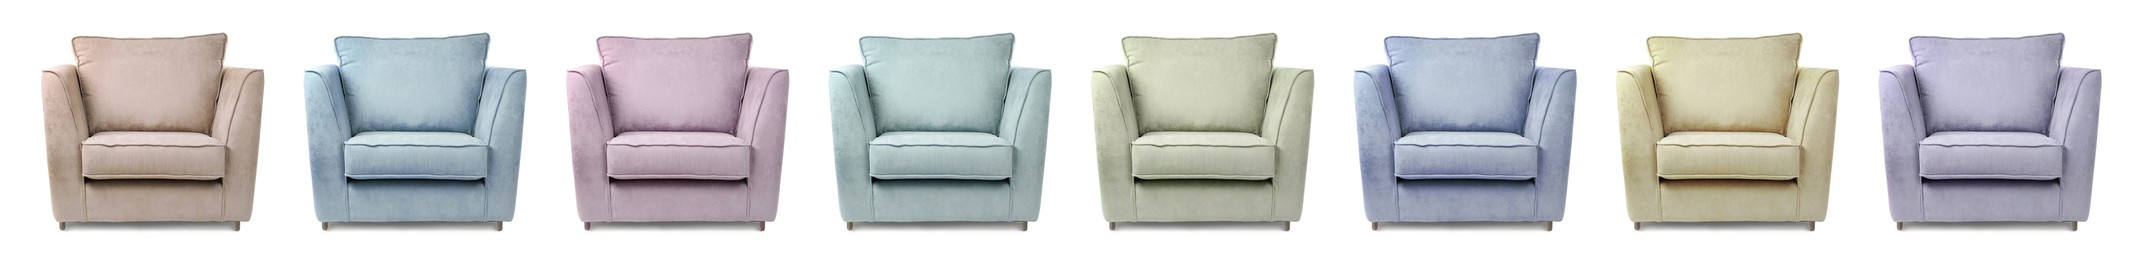 Image of Different colorful armchairs isolated on white, set